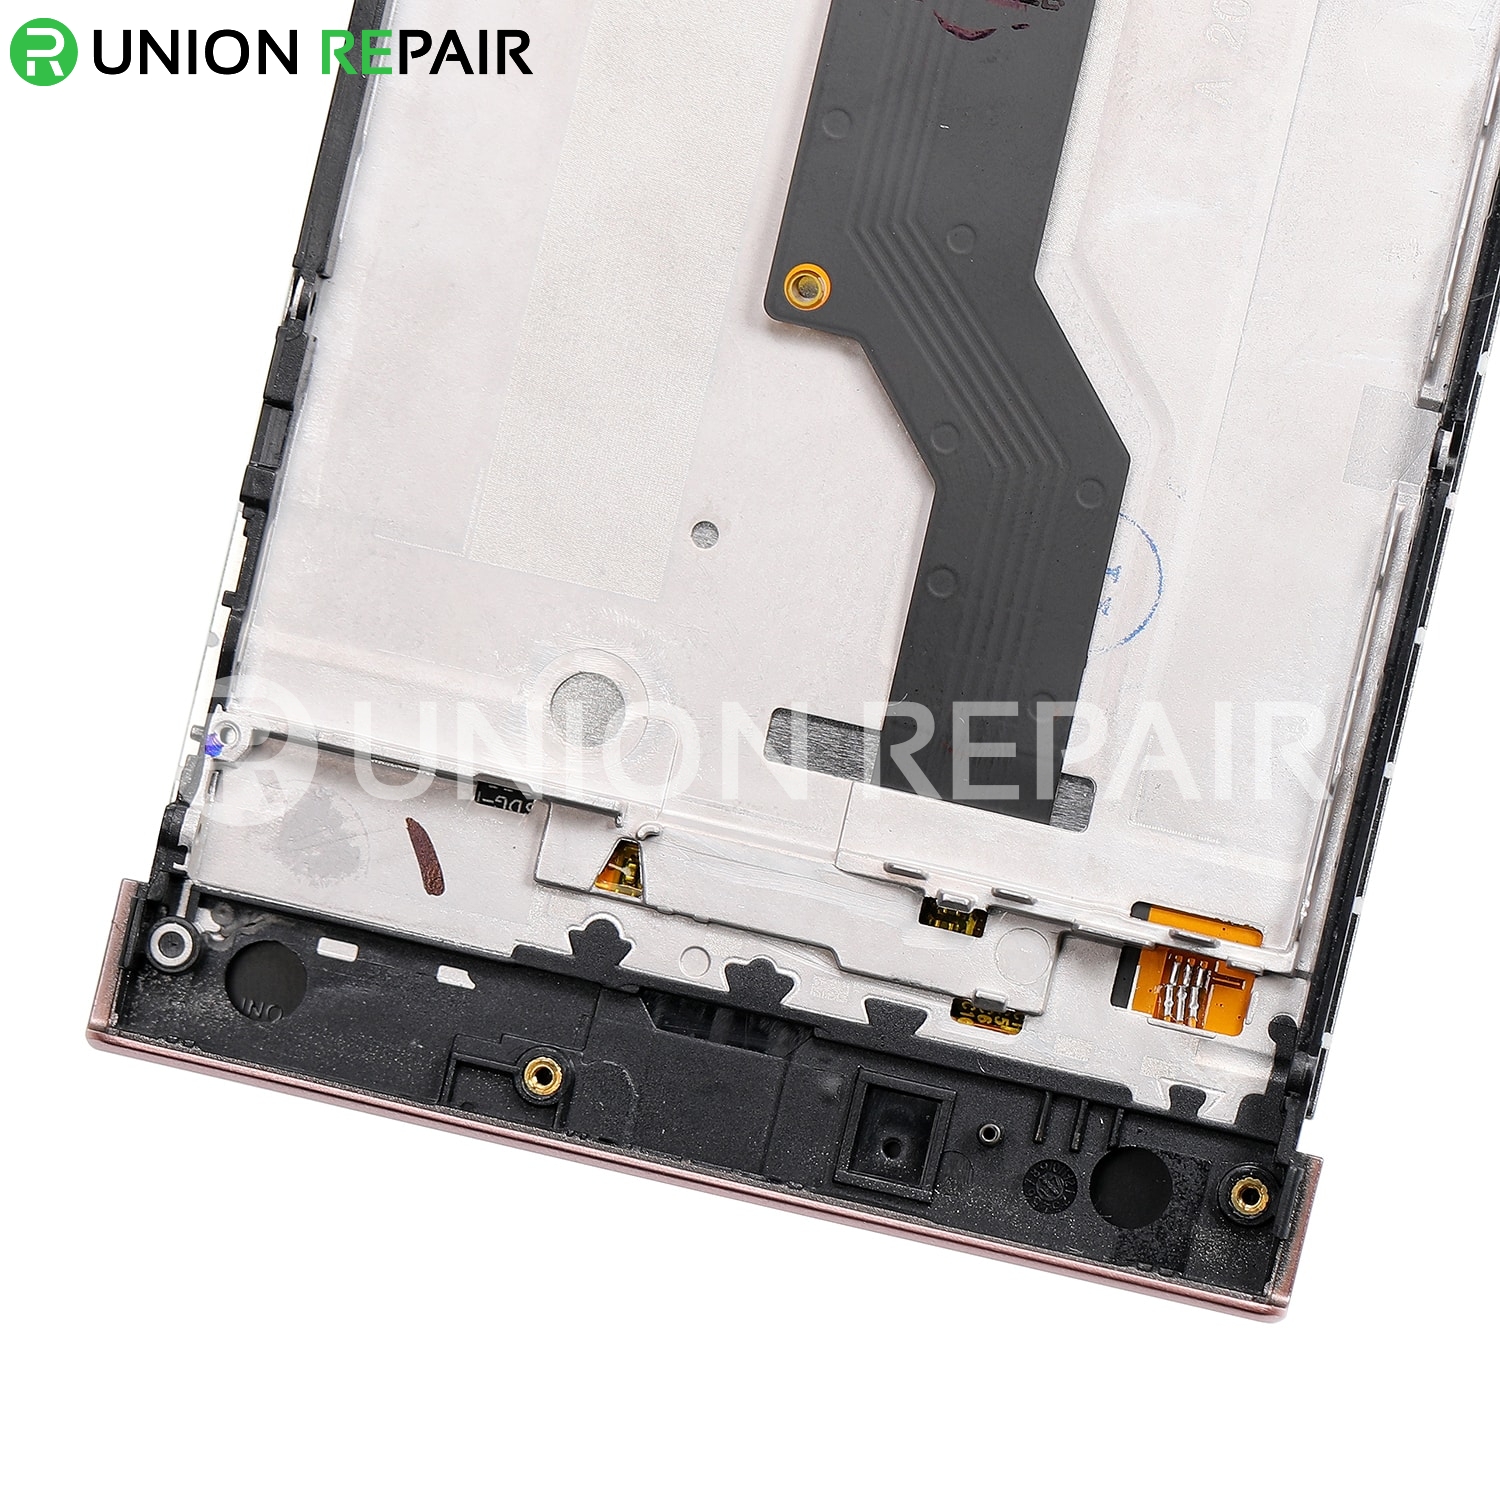 Replacement for Sony Xperia XA1 LCD Screen Digitizer Assembly with Frame - Pink